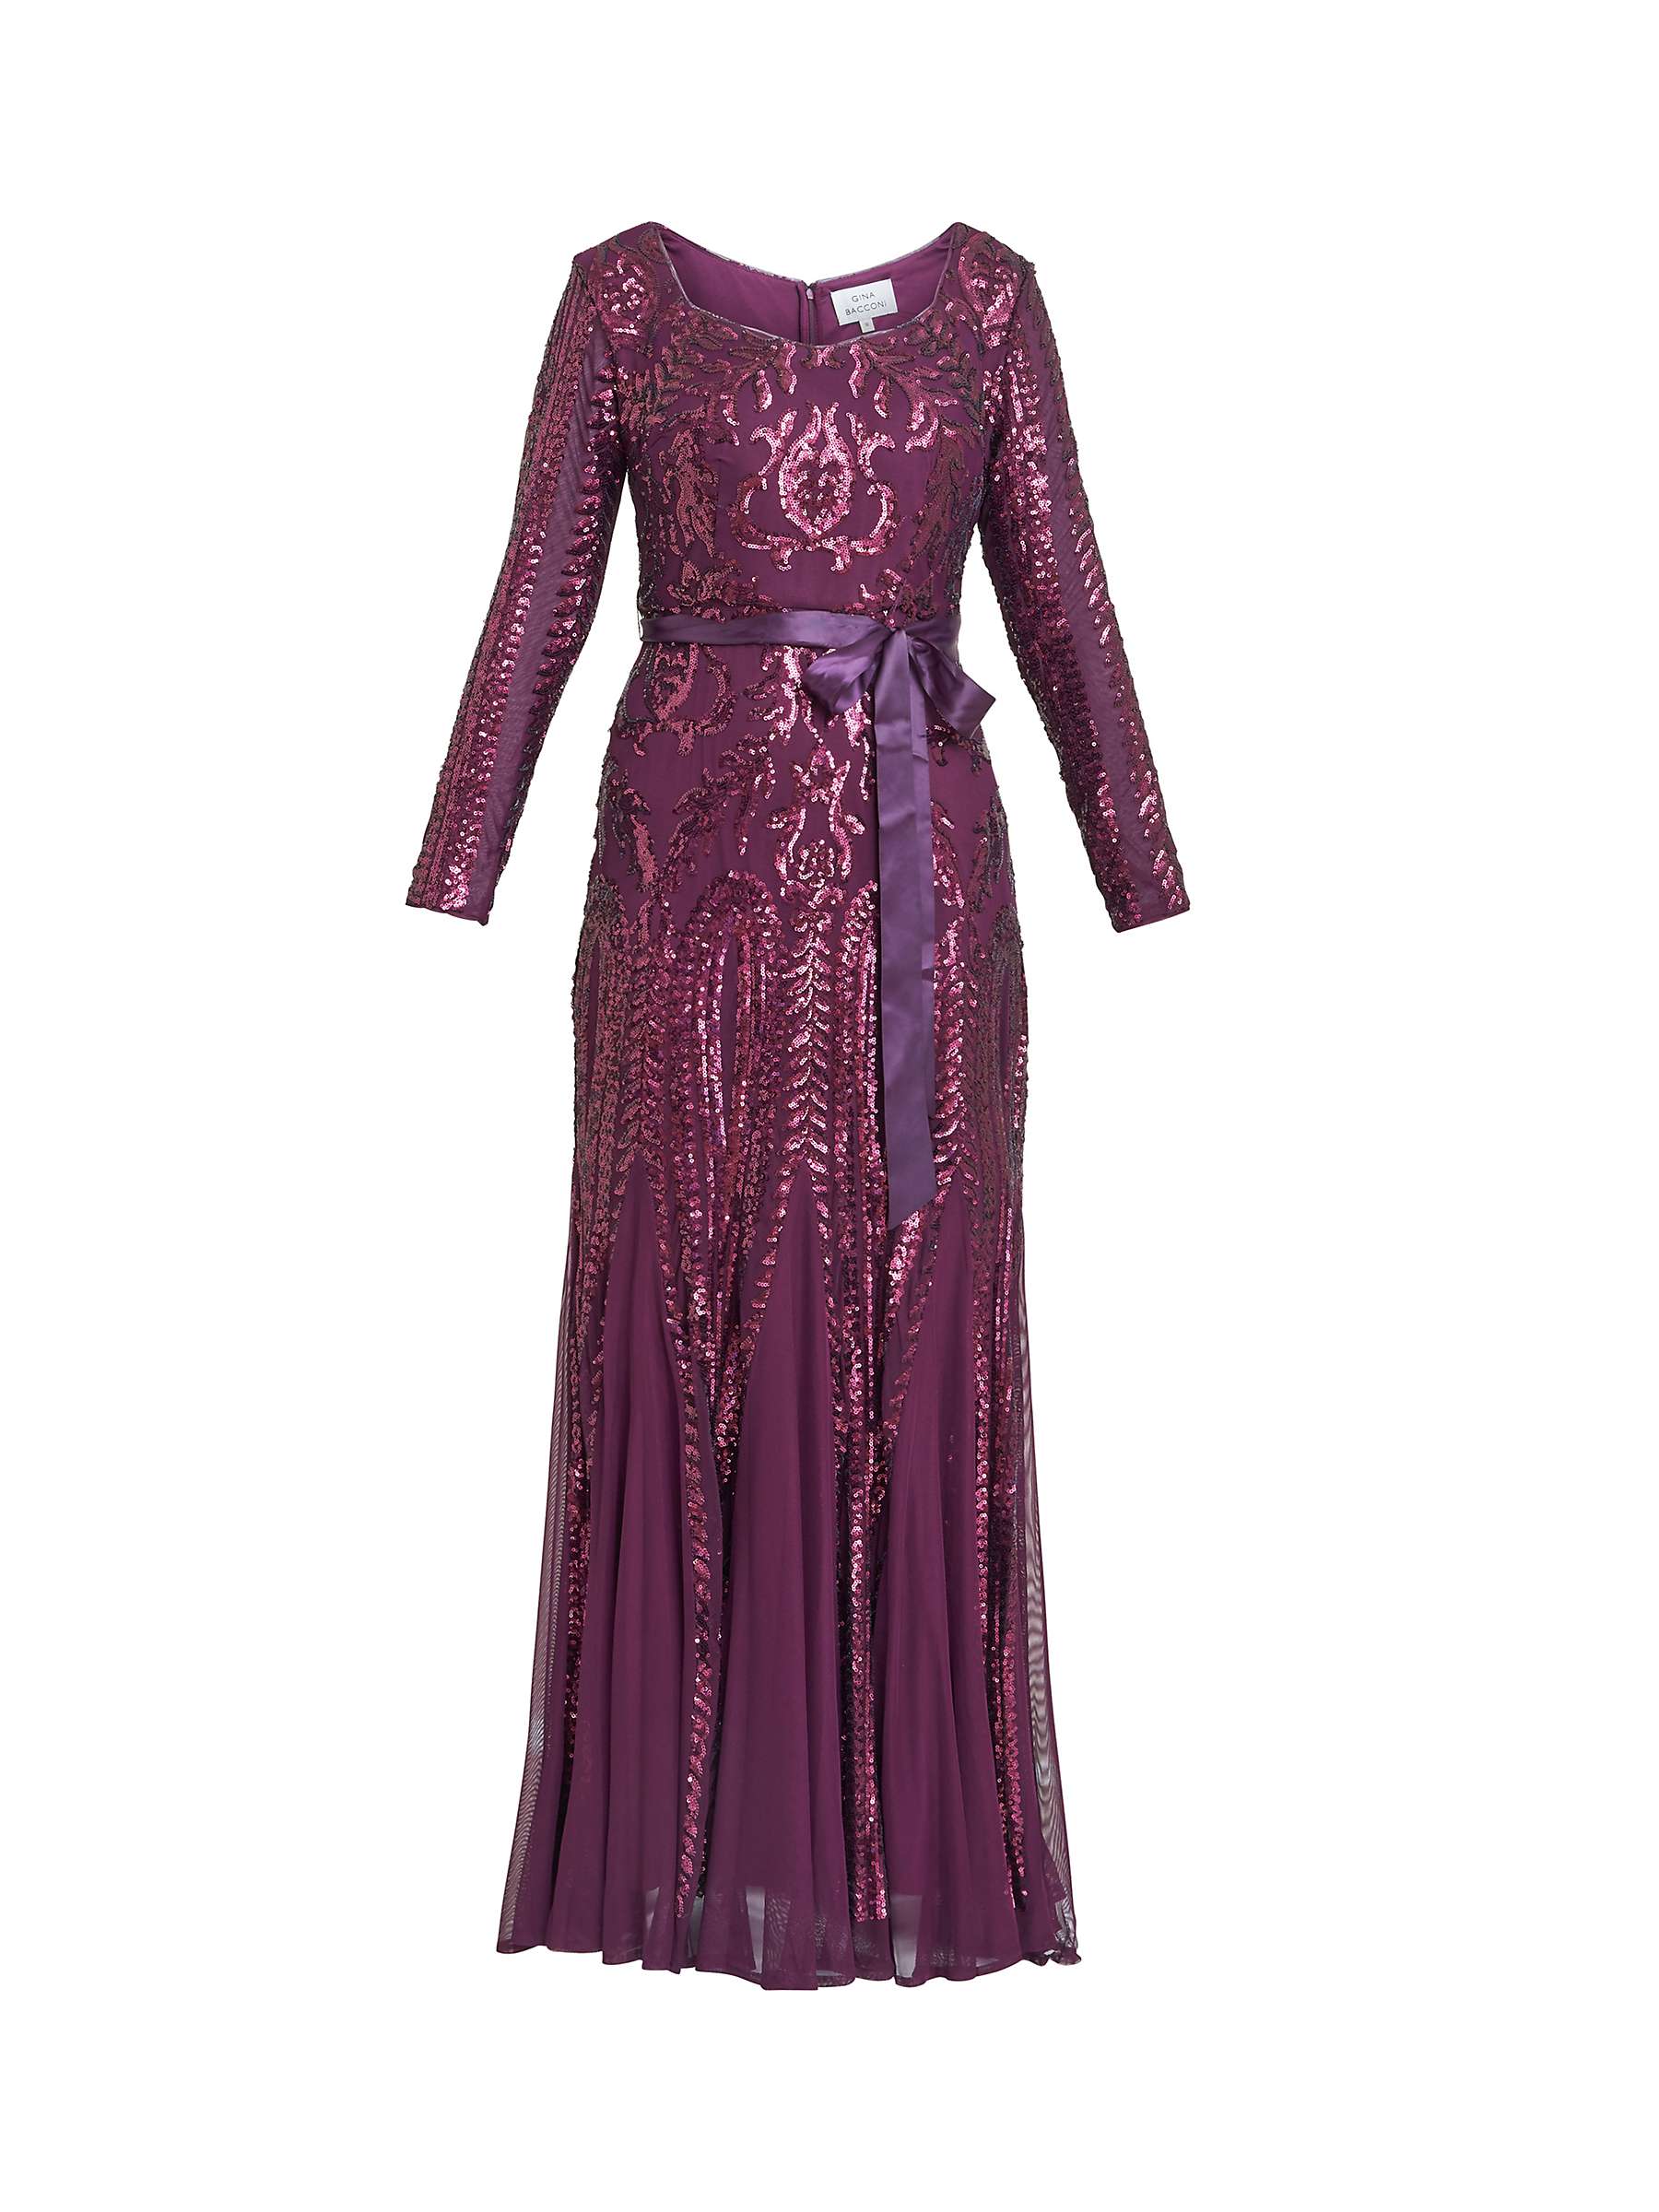 Gina Bacconi Gwen Sequined Gown, Burgundy at John Lewis & Partners